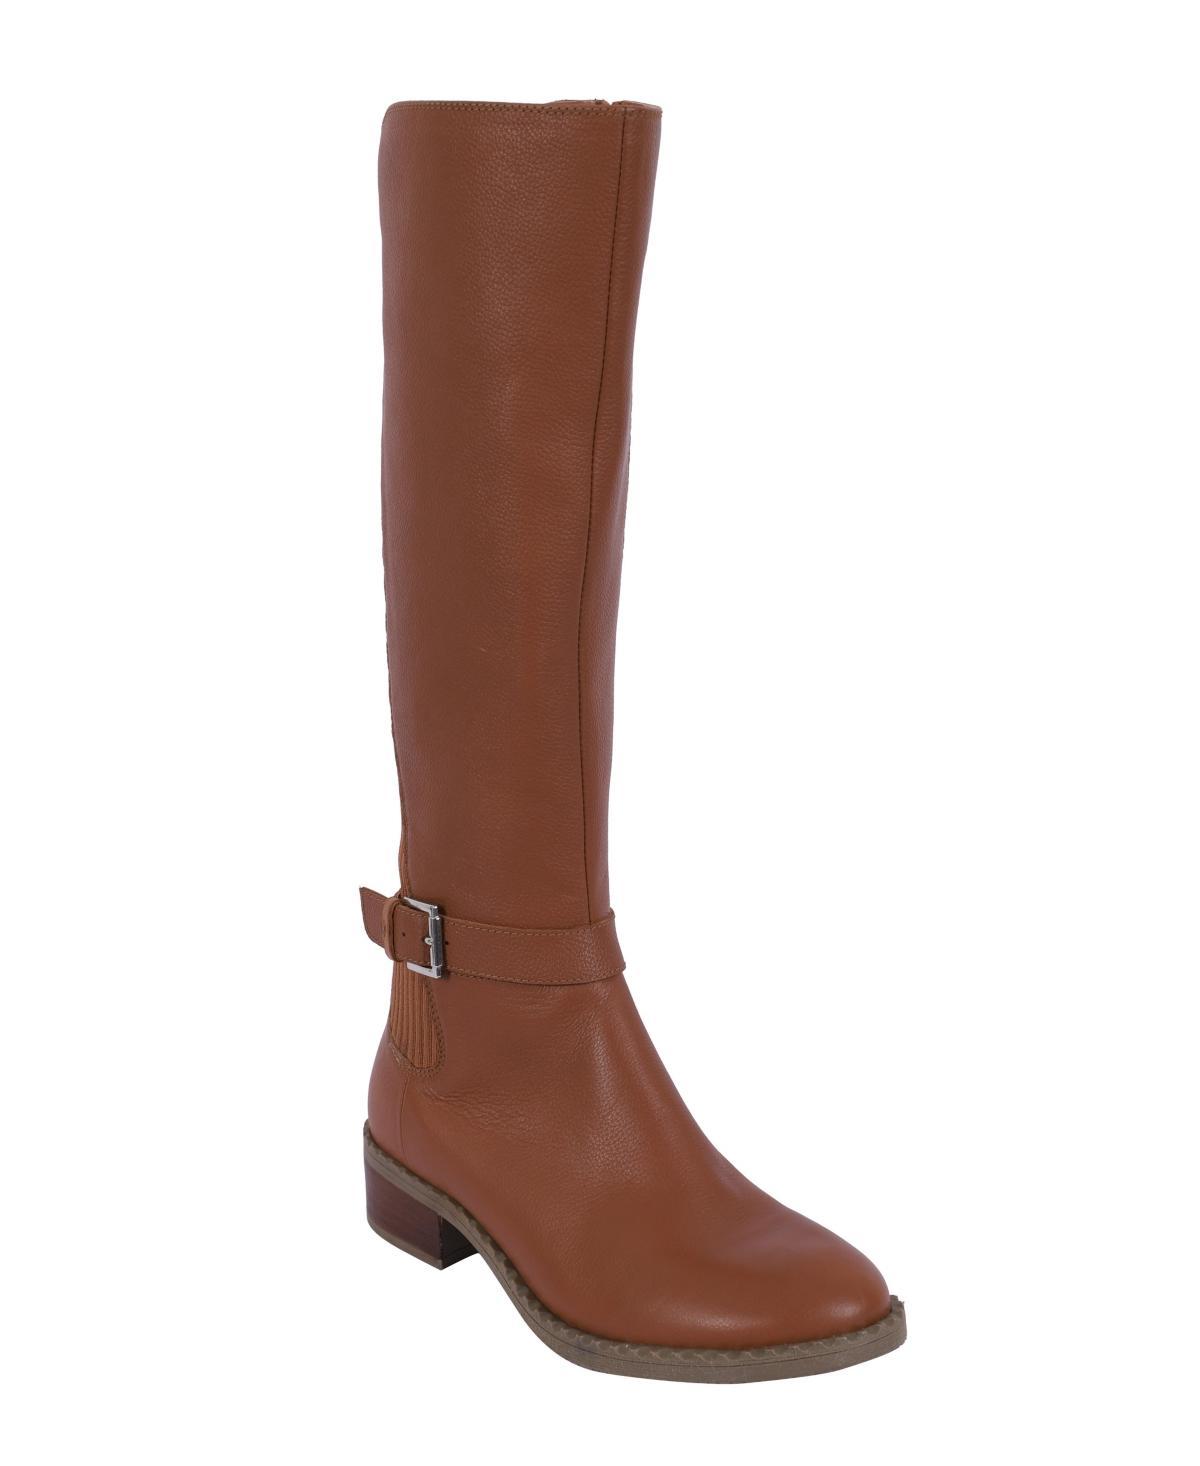 GENTLE SOULS BY KENNETH COLE Brinley Knee High Boot Product Image